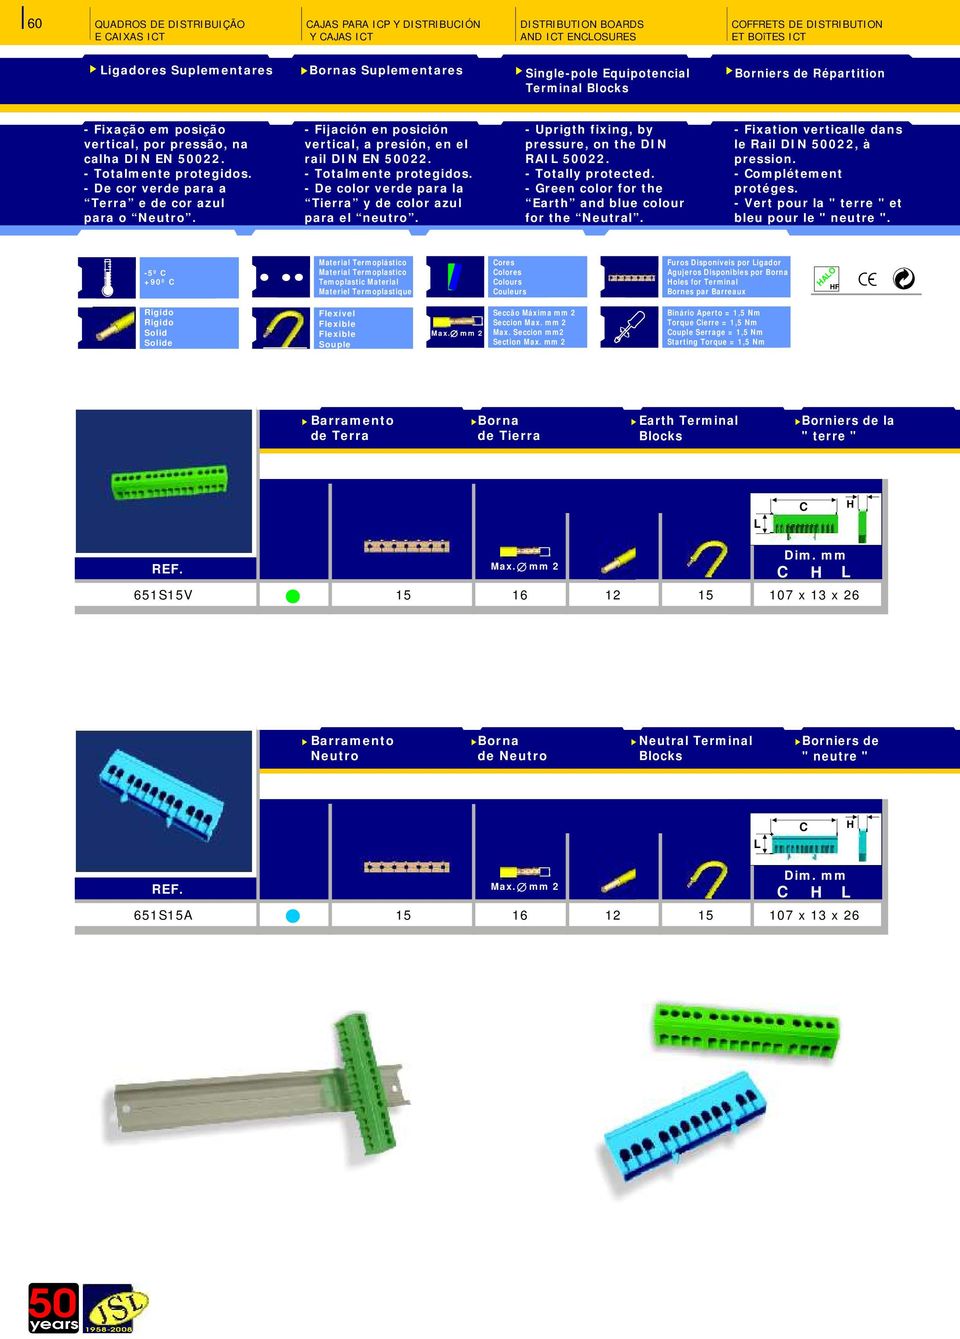 - De color verde para la Tierra y de color azul para el neutro. - Uprigth fixing, by pressure, on the DIN RAI 00. - Totally protected. - Green color for the Earth and blue colour for the Neutral.